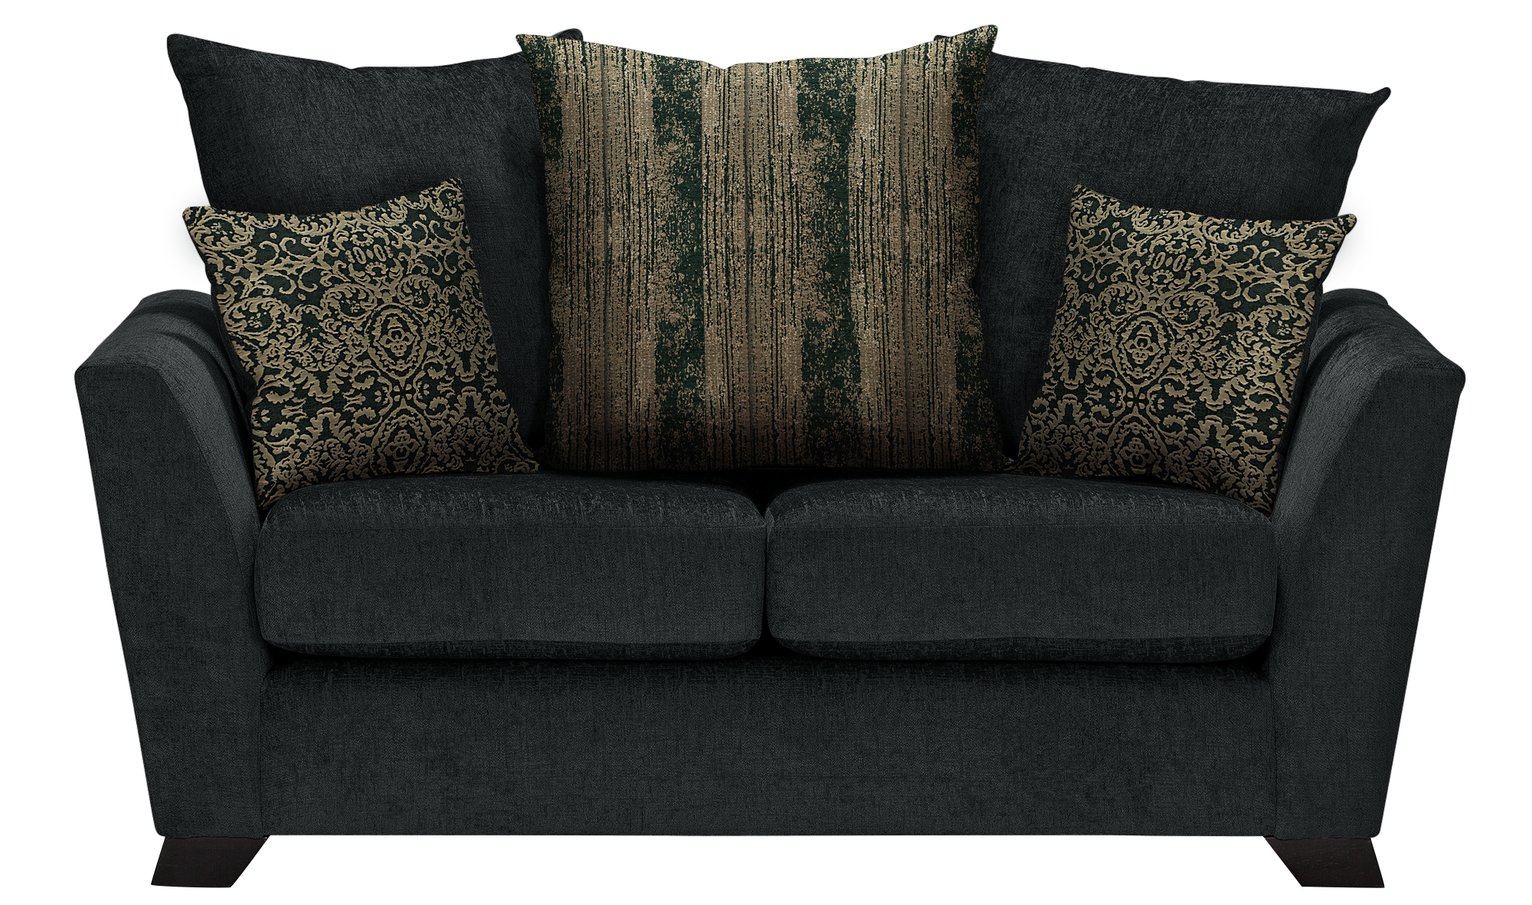 Argos Home Vivienne 2 Seater Fabric Sofa - Black and Gold